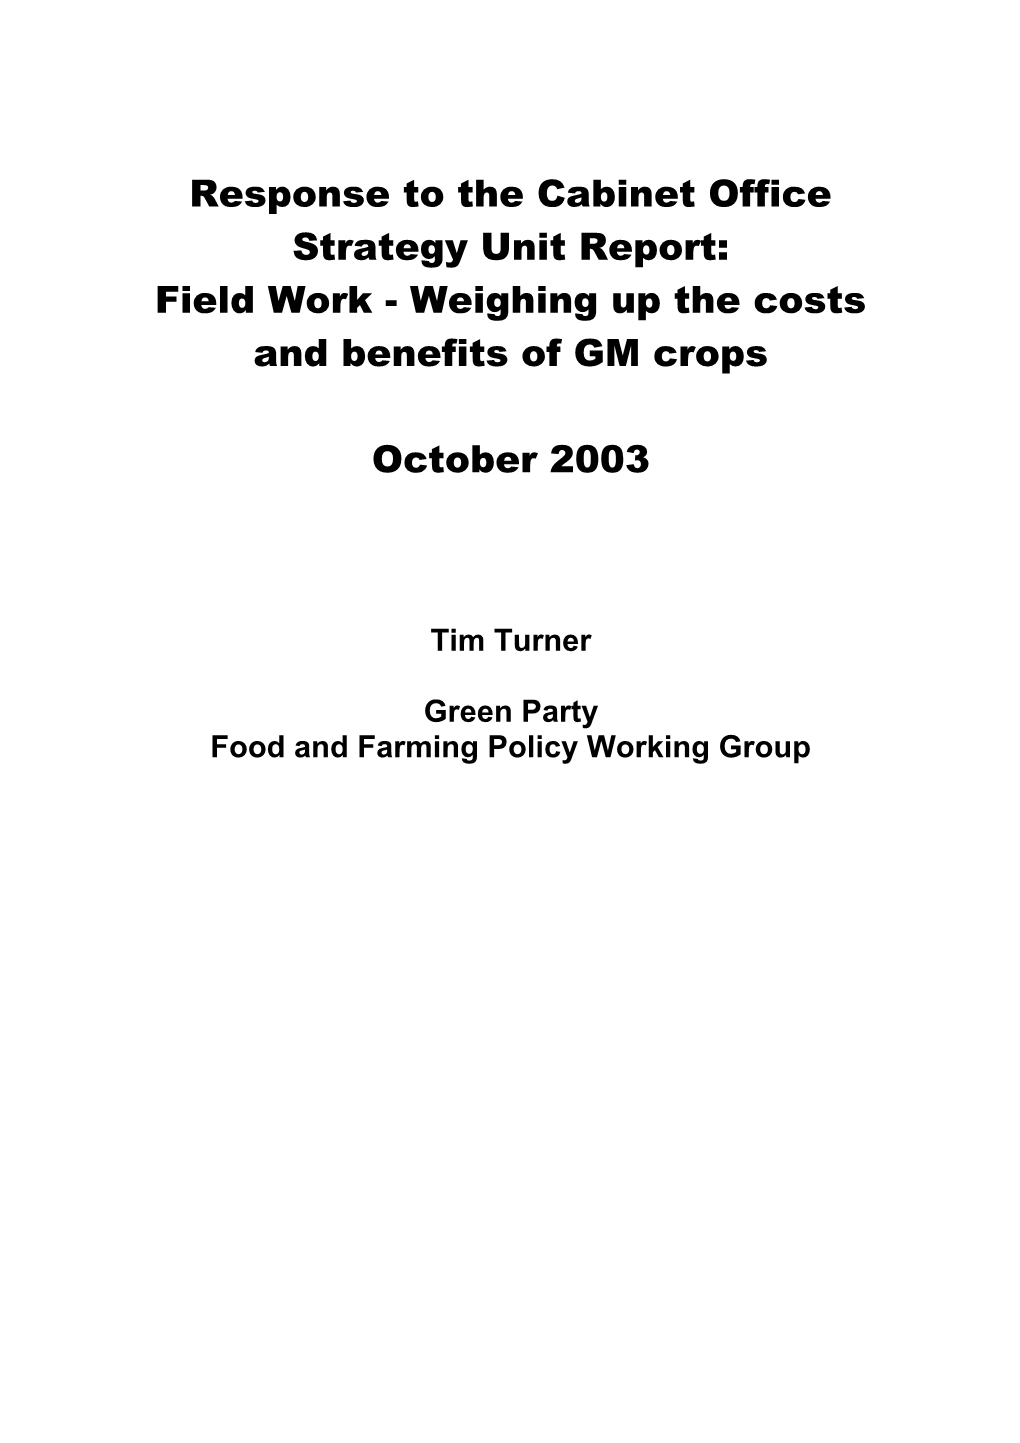 Submission on the Strategy Unit S Report